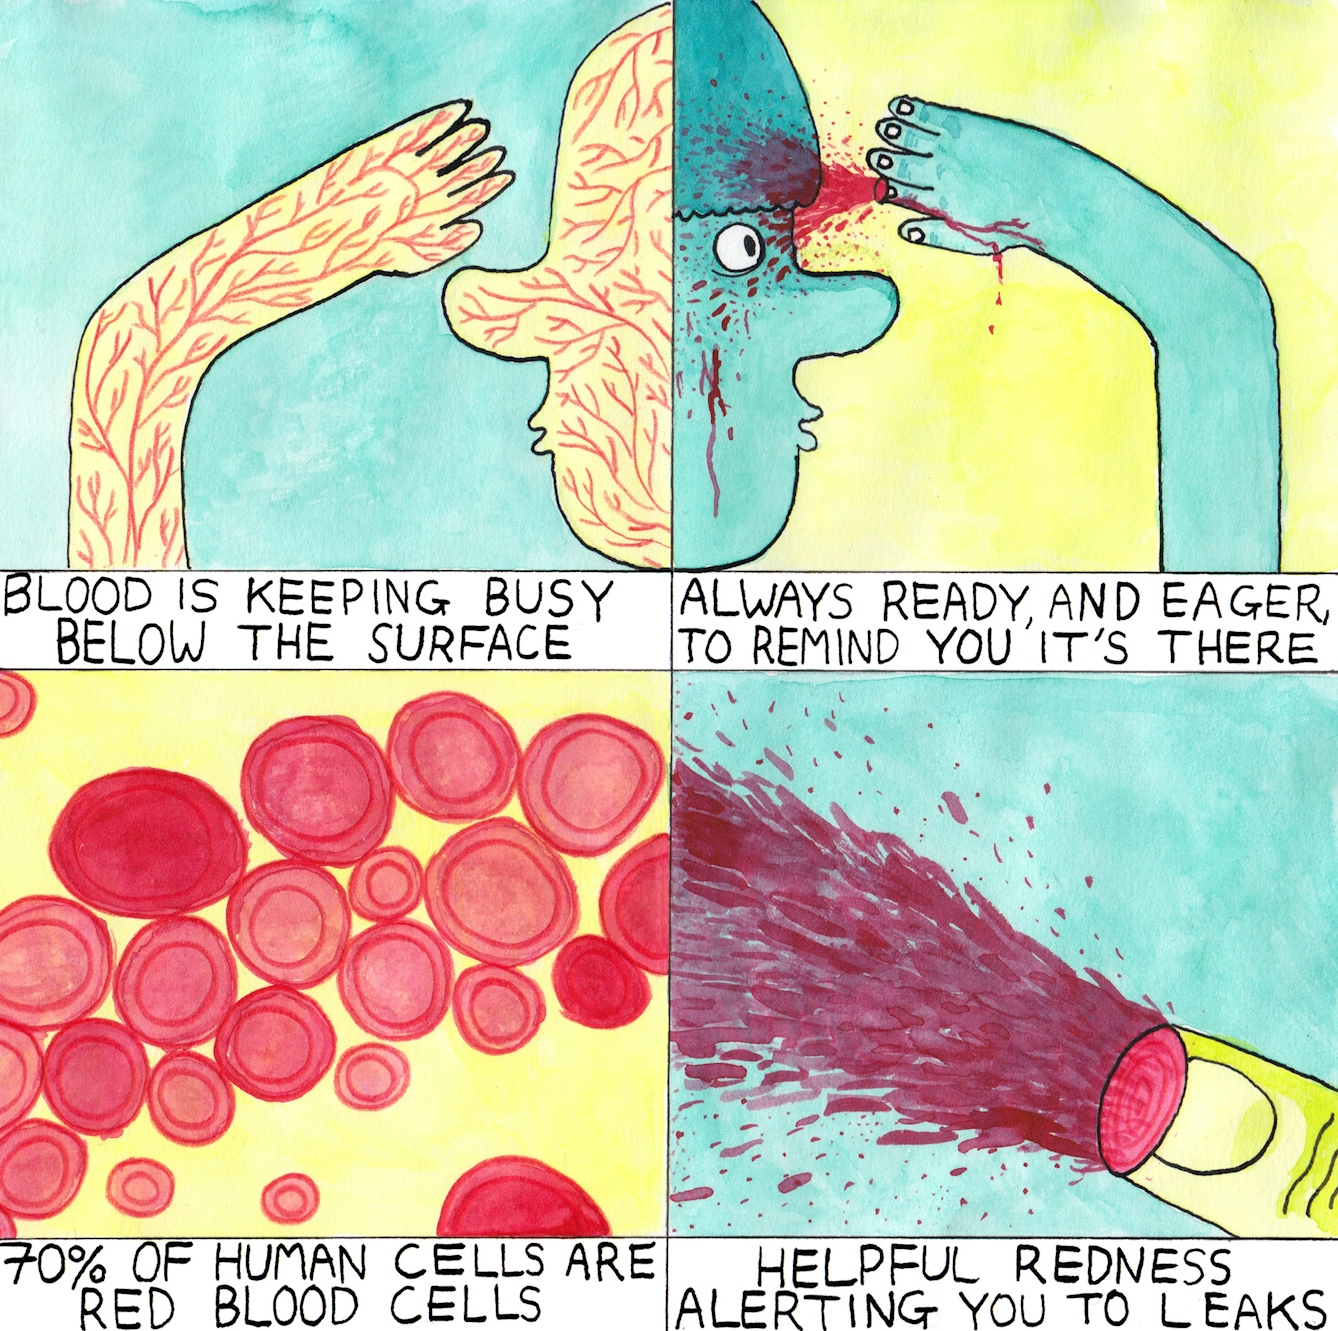 Four drawings of blood circulating, red blood cells and bleeding fingers.